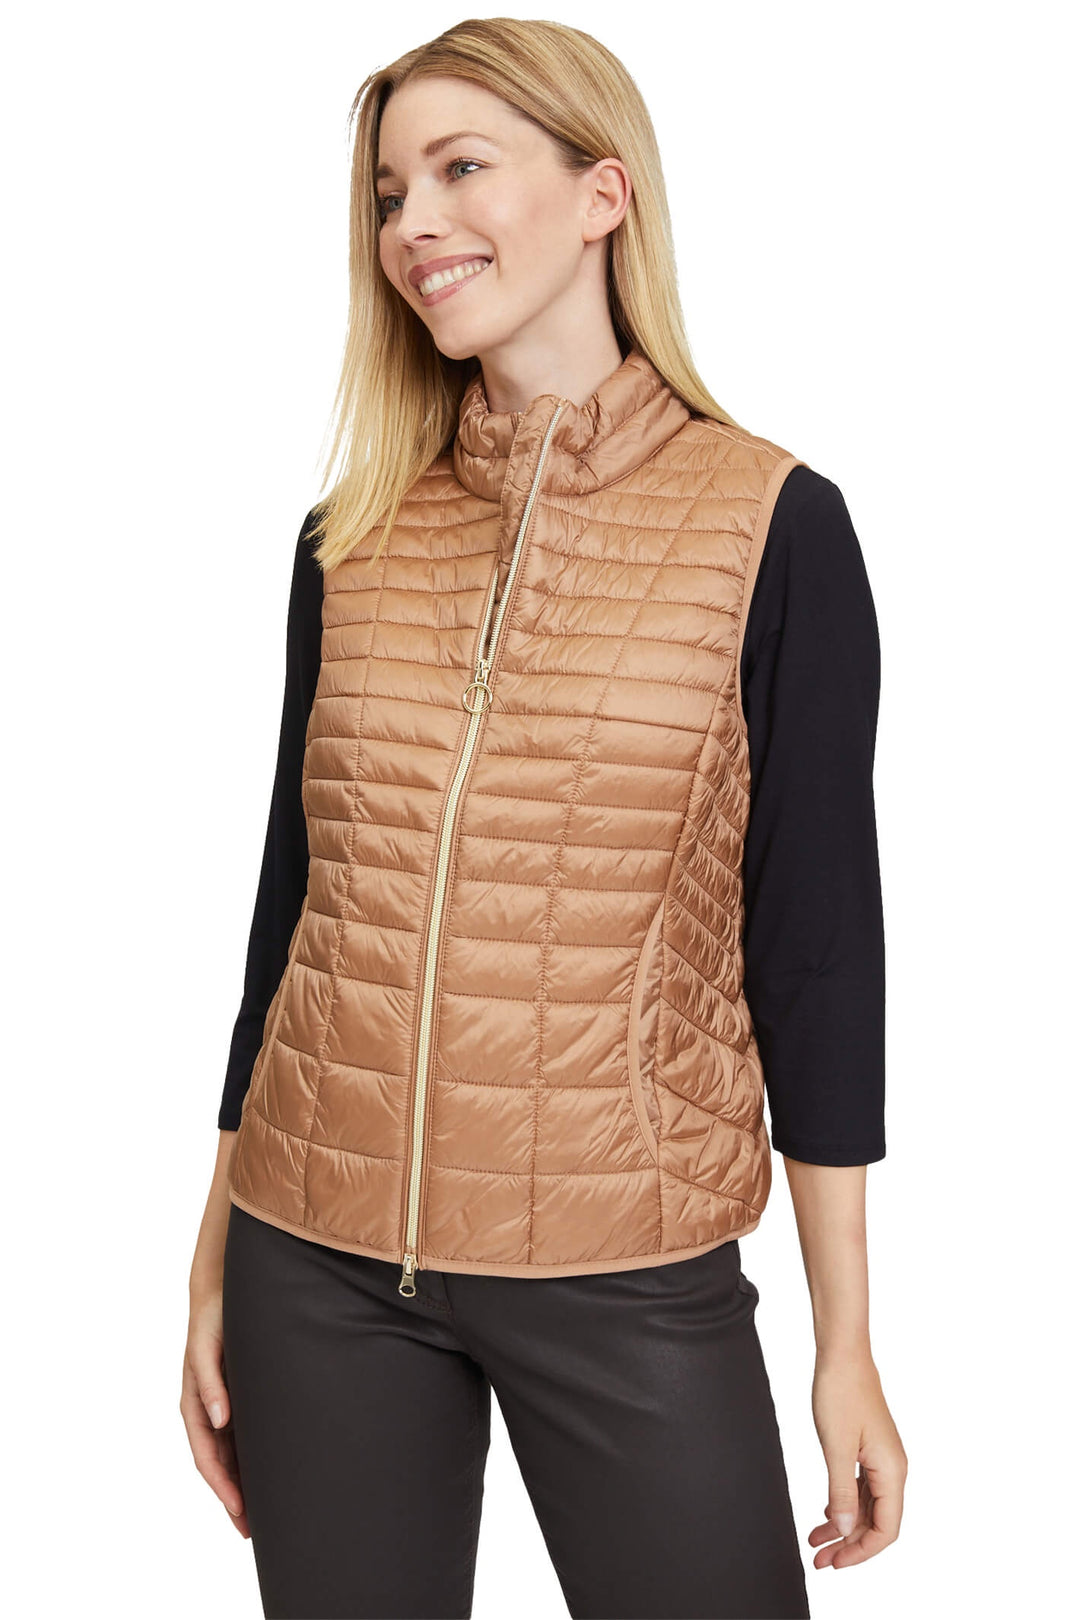 Betty Barclay 7195 1902 7030 Golden Camel Padded Gilet - Dotique Chesterfield